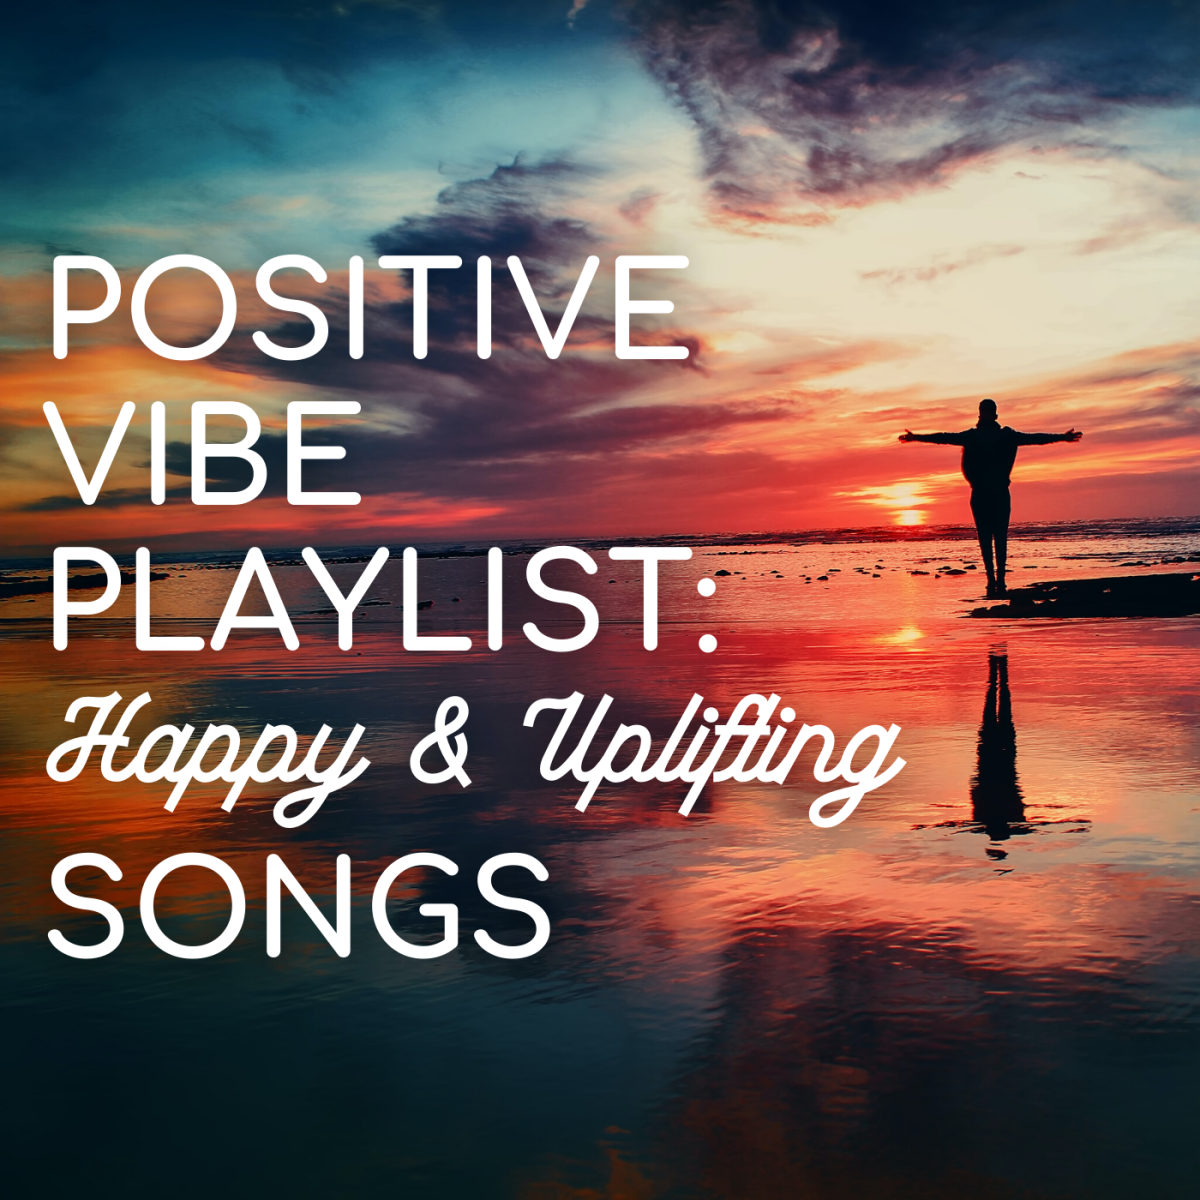 Want to feel upbeat and happy and add a pep to your step? We've got pop, rock, and country favorites that will have your toes tapping and add a smile to your face!